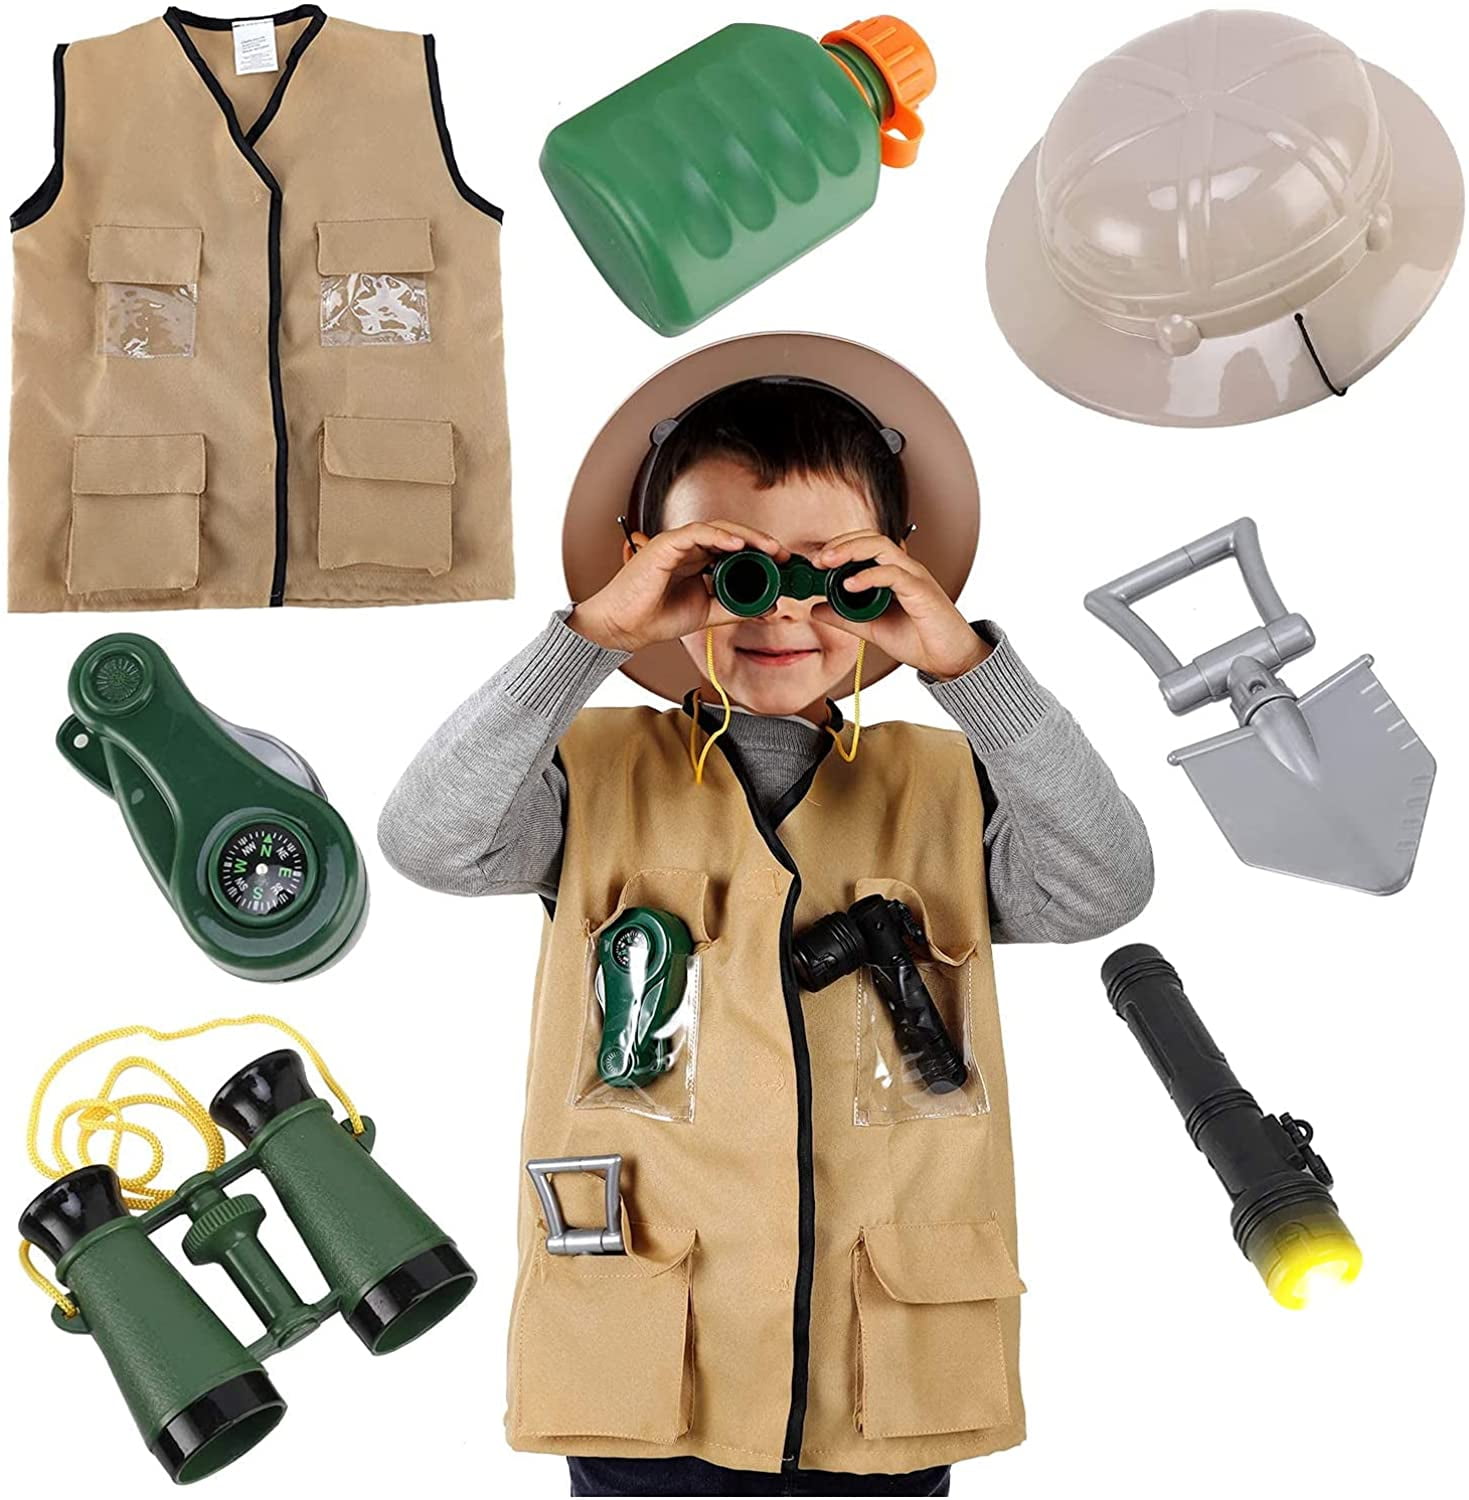 Junior Backyard Safari Explorer Kids Role Play Set - Washable Cargo Vest  and Outdoor Adventure Camping Gear Costume Kit and Accessories